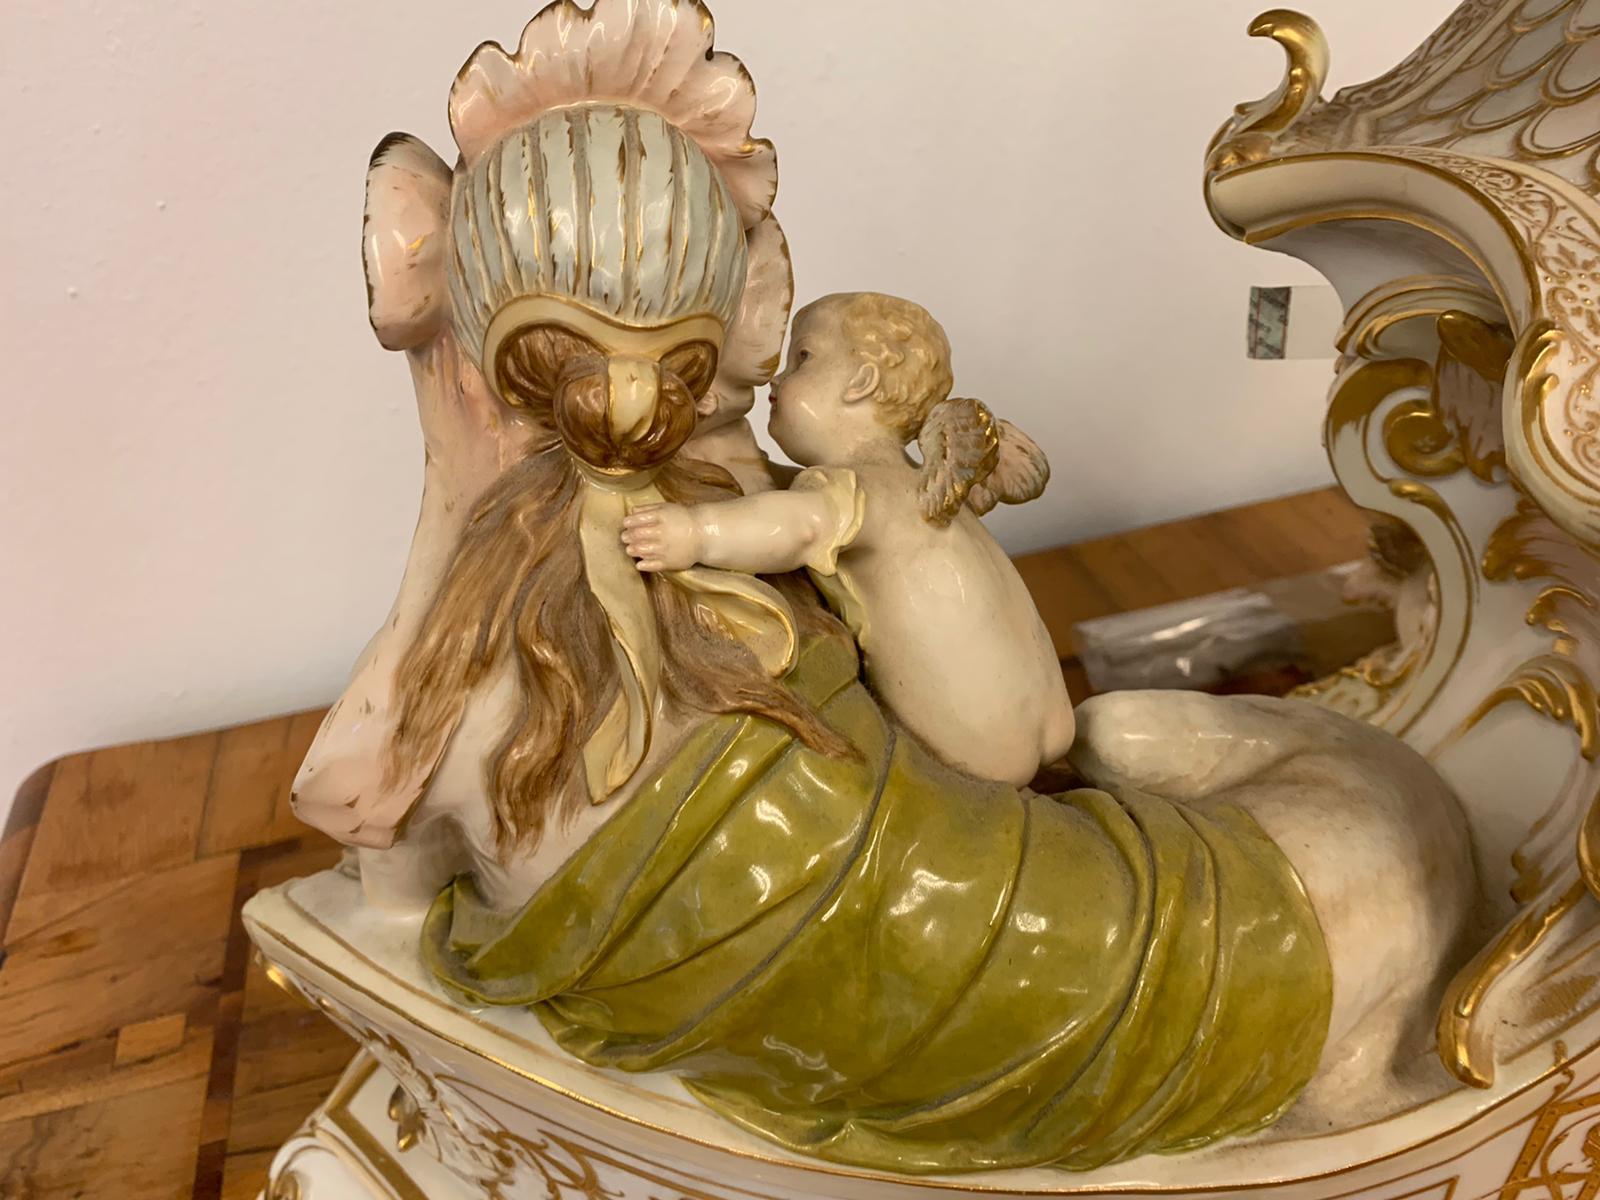 Porcelain Fireplace-Mantel Clock with Two Sphinxes and Cherubs KPM, Berlin 6